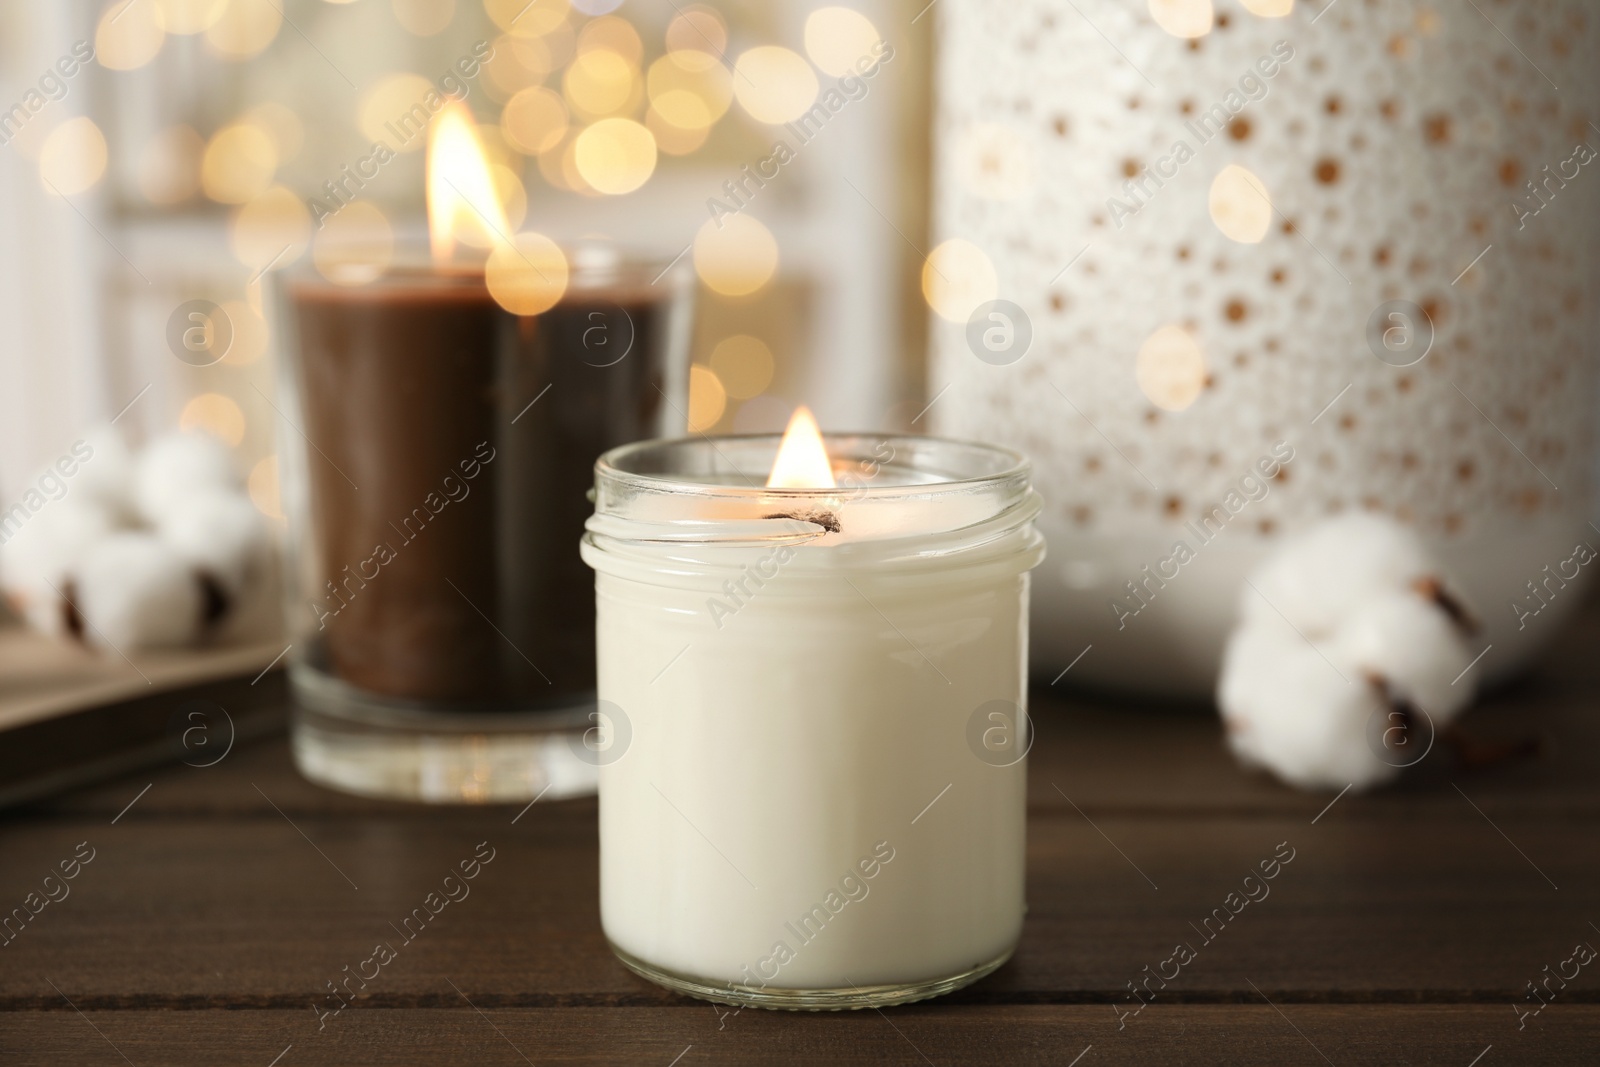 Photo of Burning candles in glass holders on wooden table